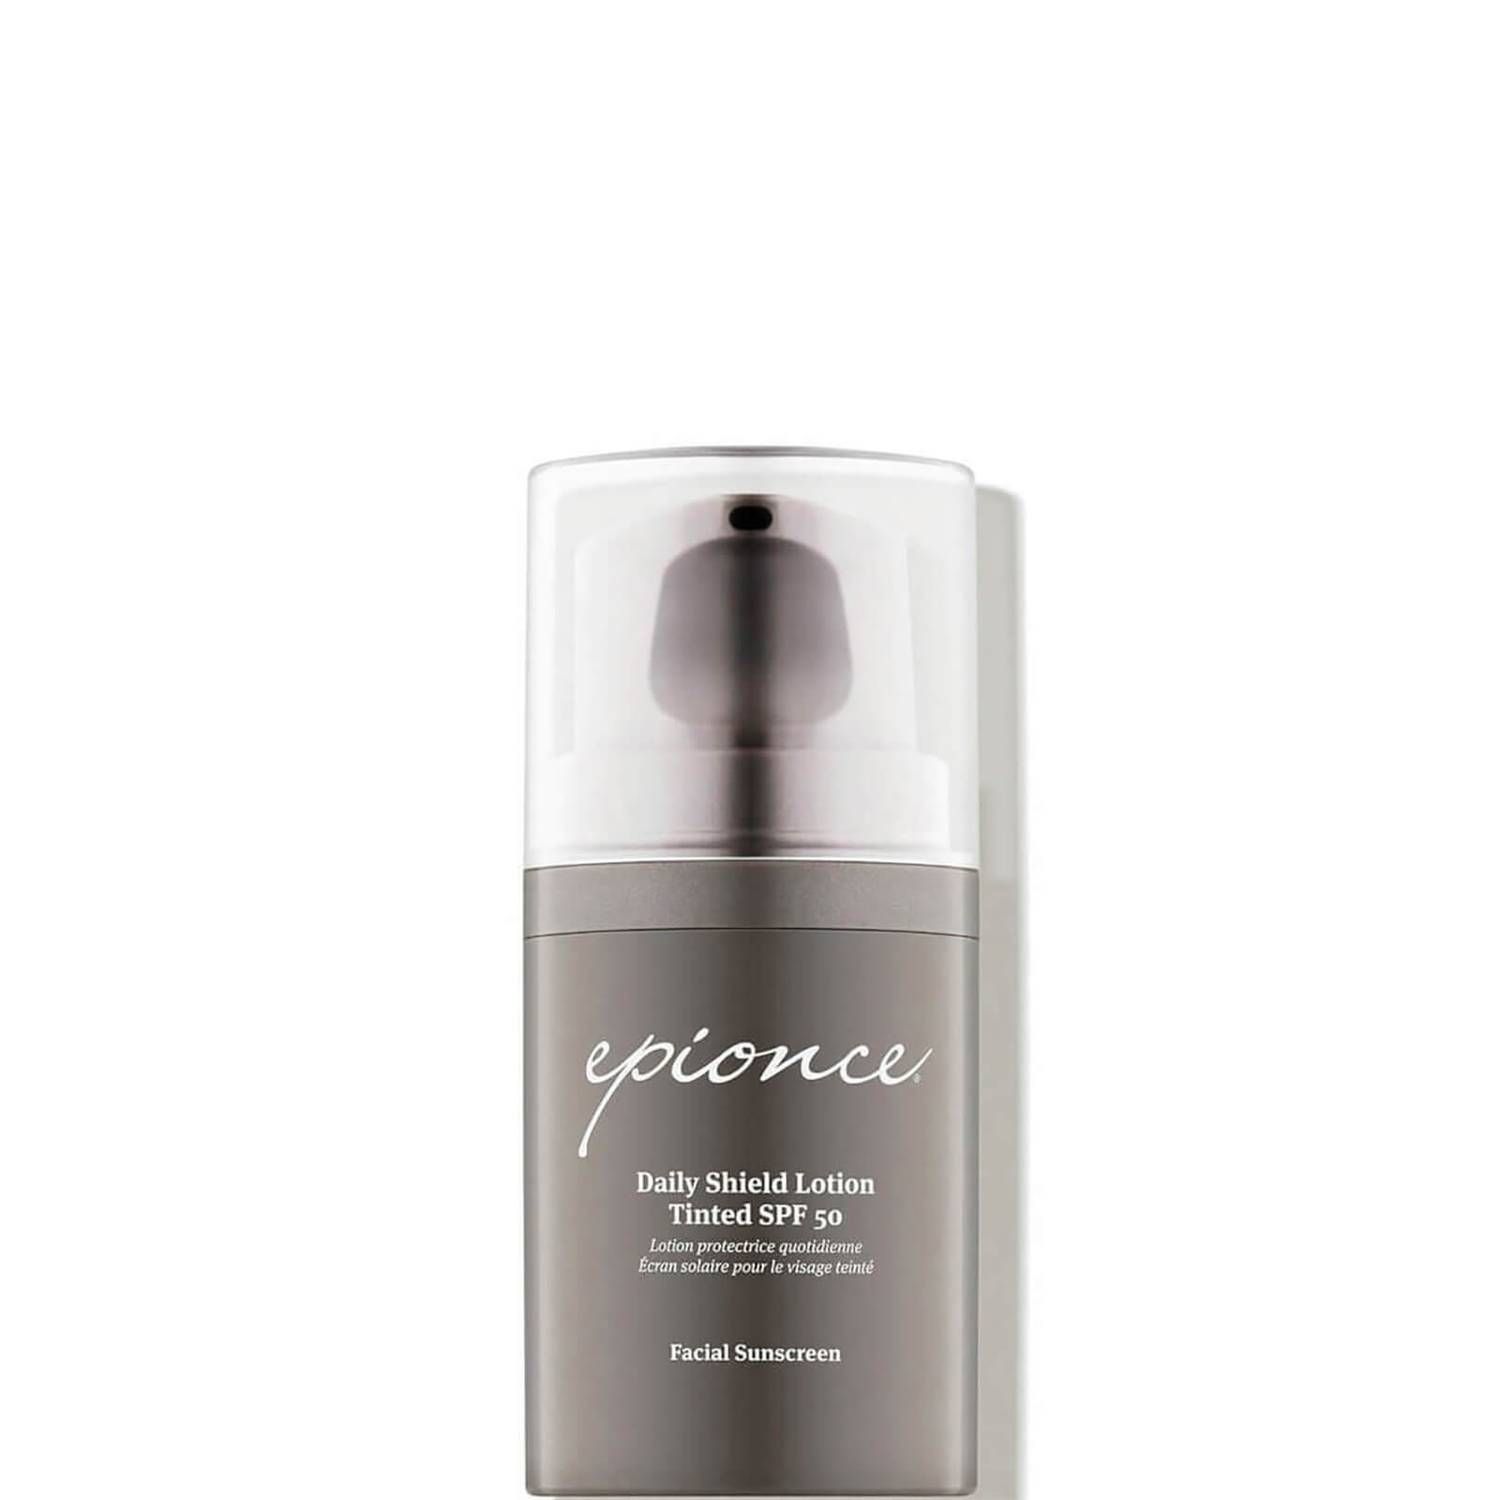 Epionce Daily Shield Lotion Tinted SPF 50 1.7 fl. oz. | Dermstore (US)